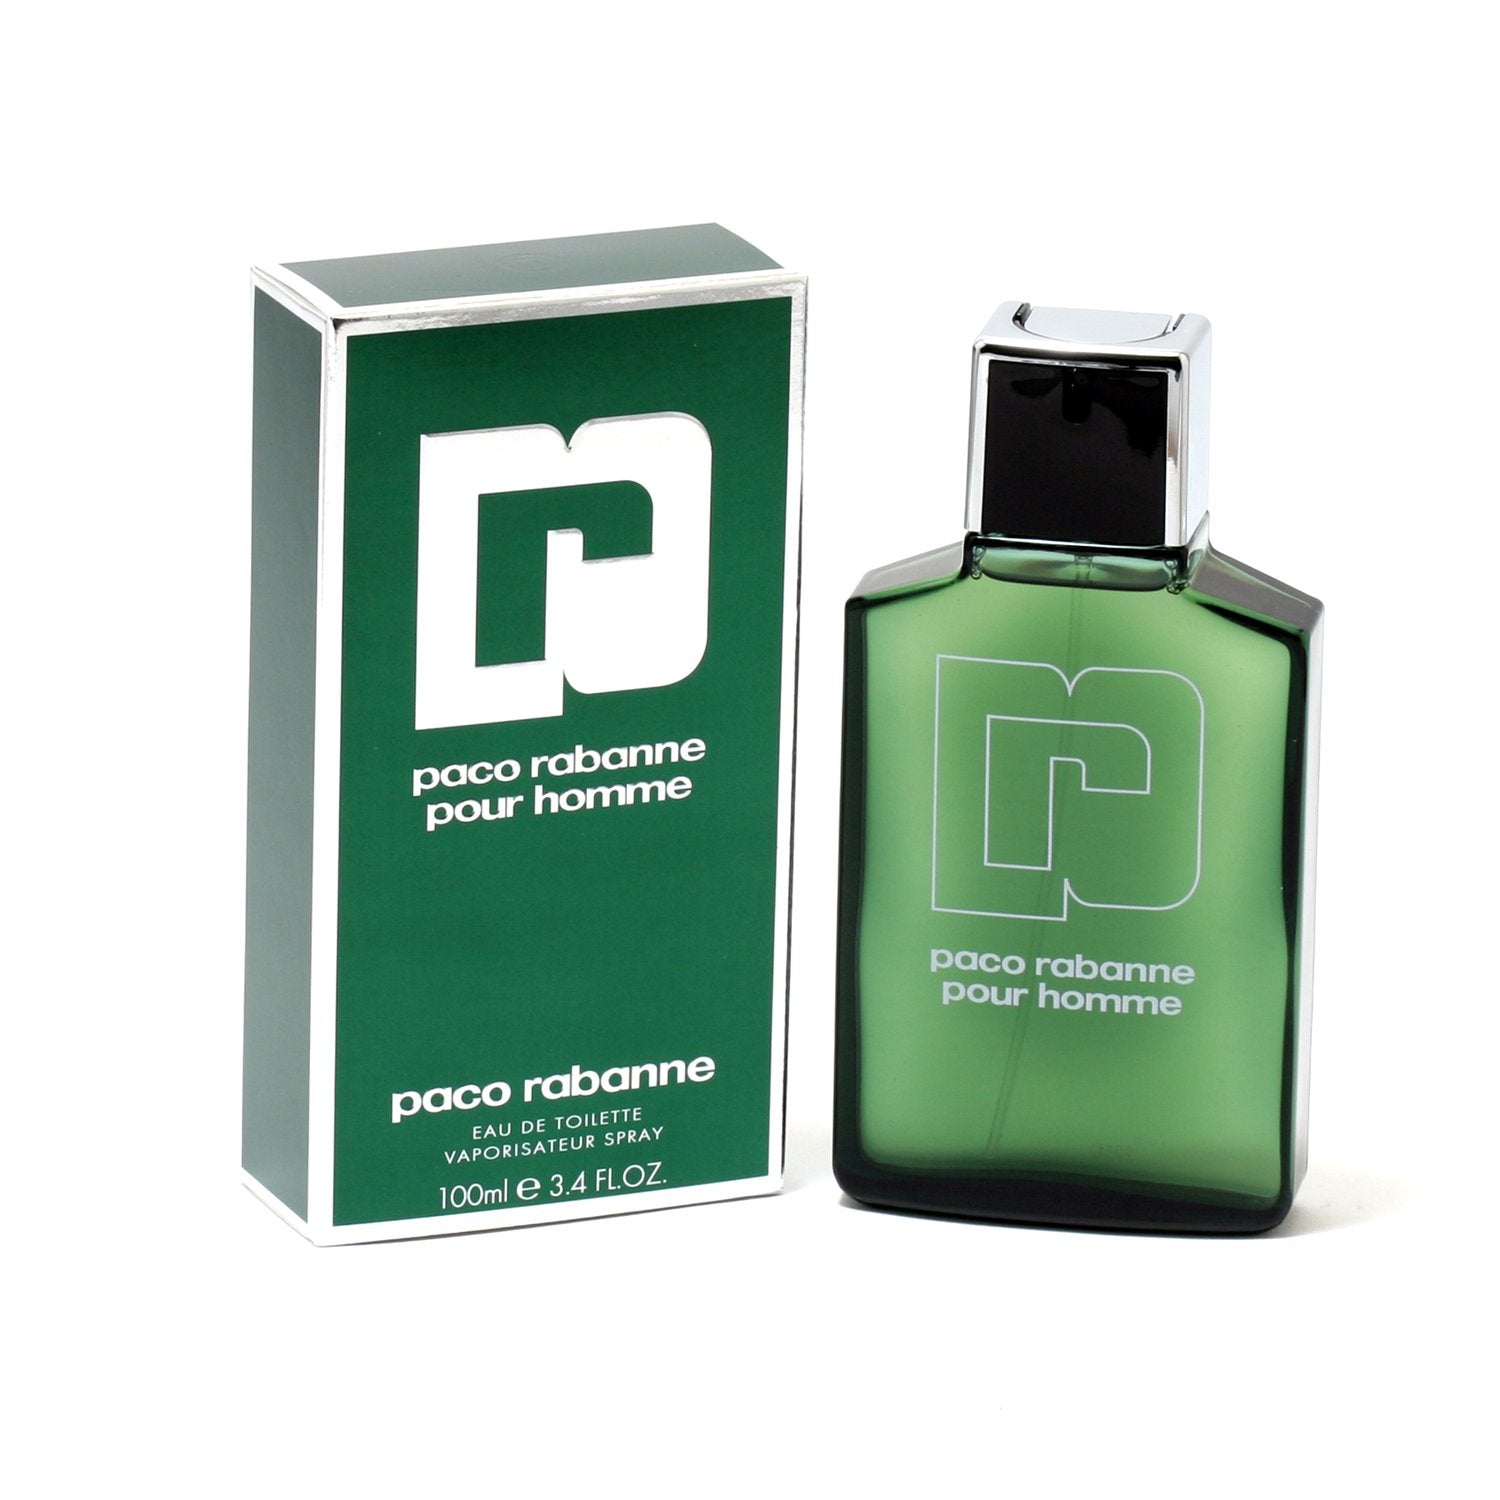 Homme paco. Paco Rabanne for men. Paco Rabanne мужские. Paco Rabanne XS pour homme 100 мл. Paco Rabanne Парфюм.